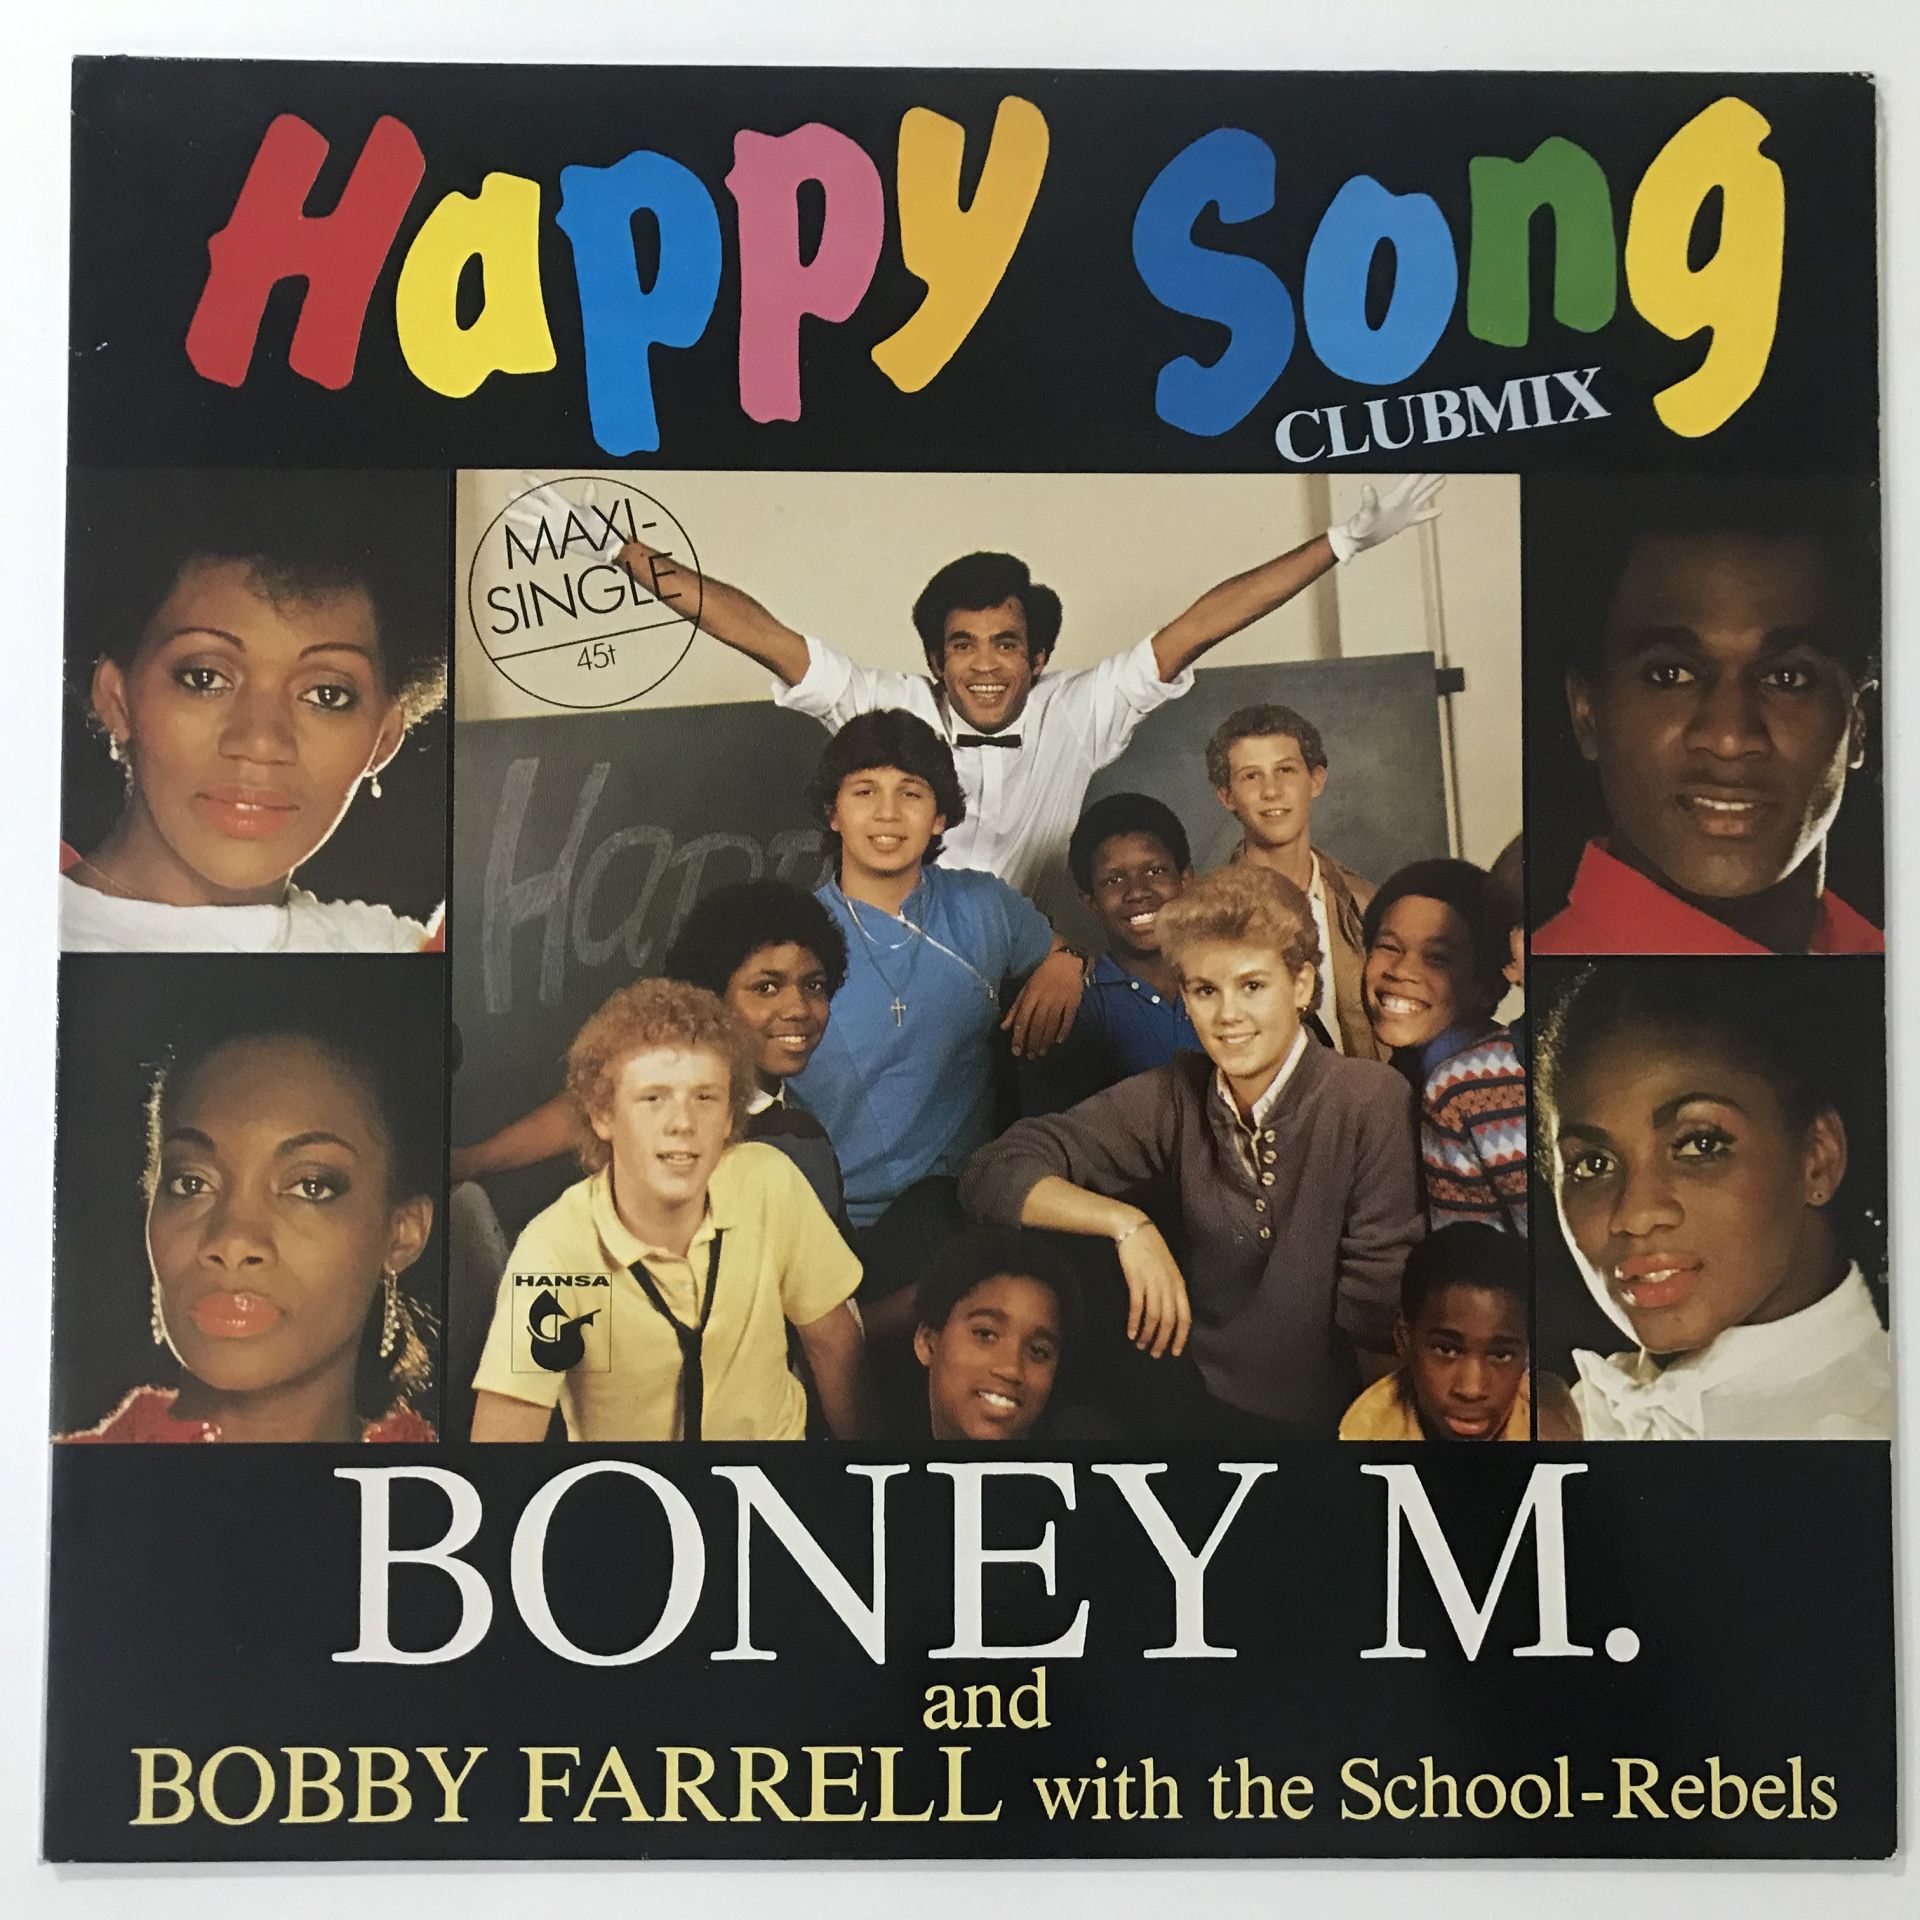 Boney M. And Bobby Farrell With The School-Rebels – Happy Song (Clubmix)